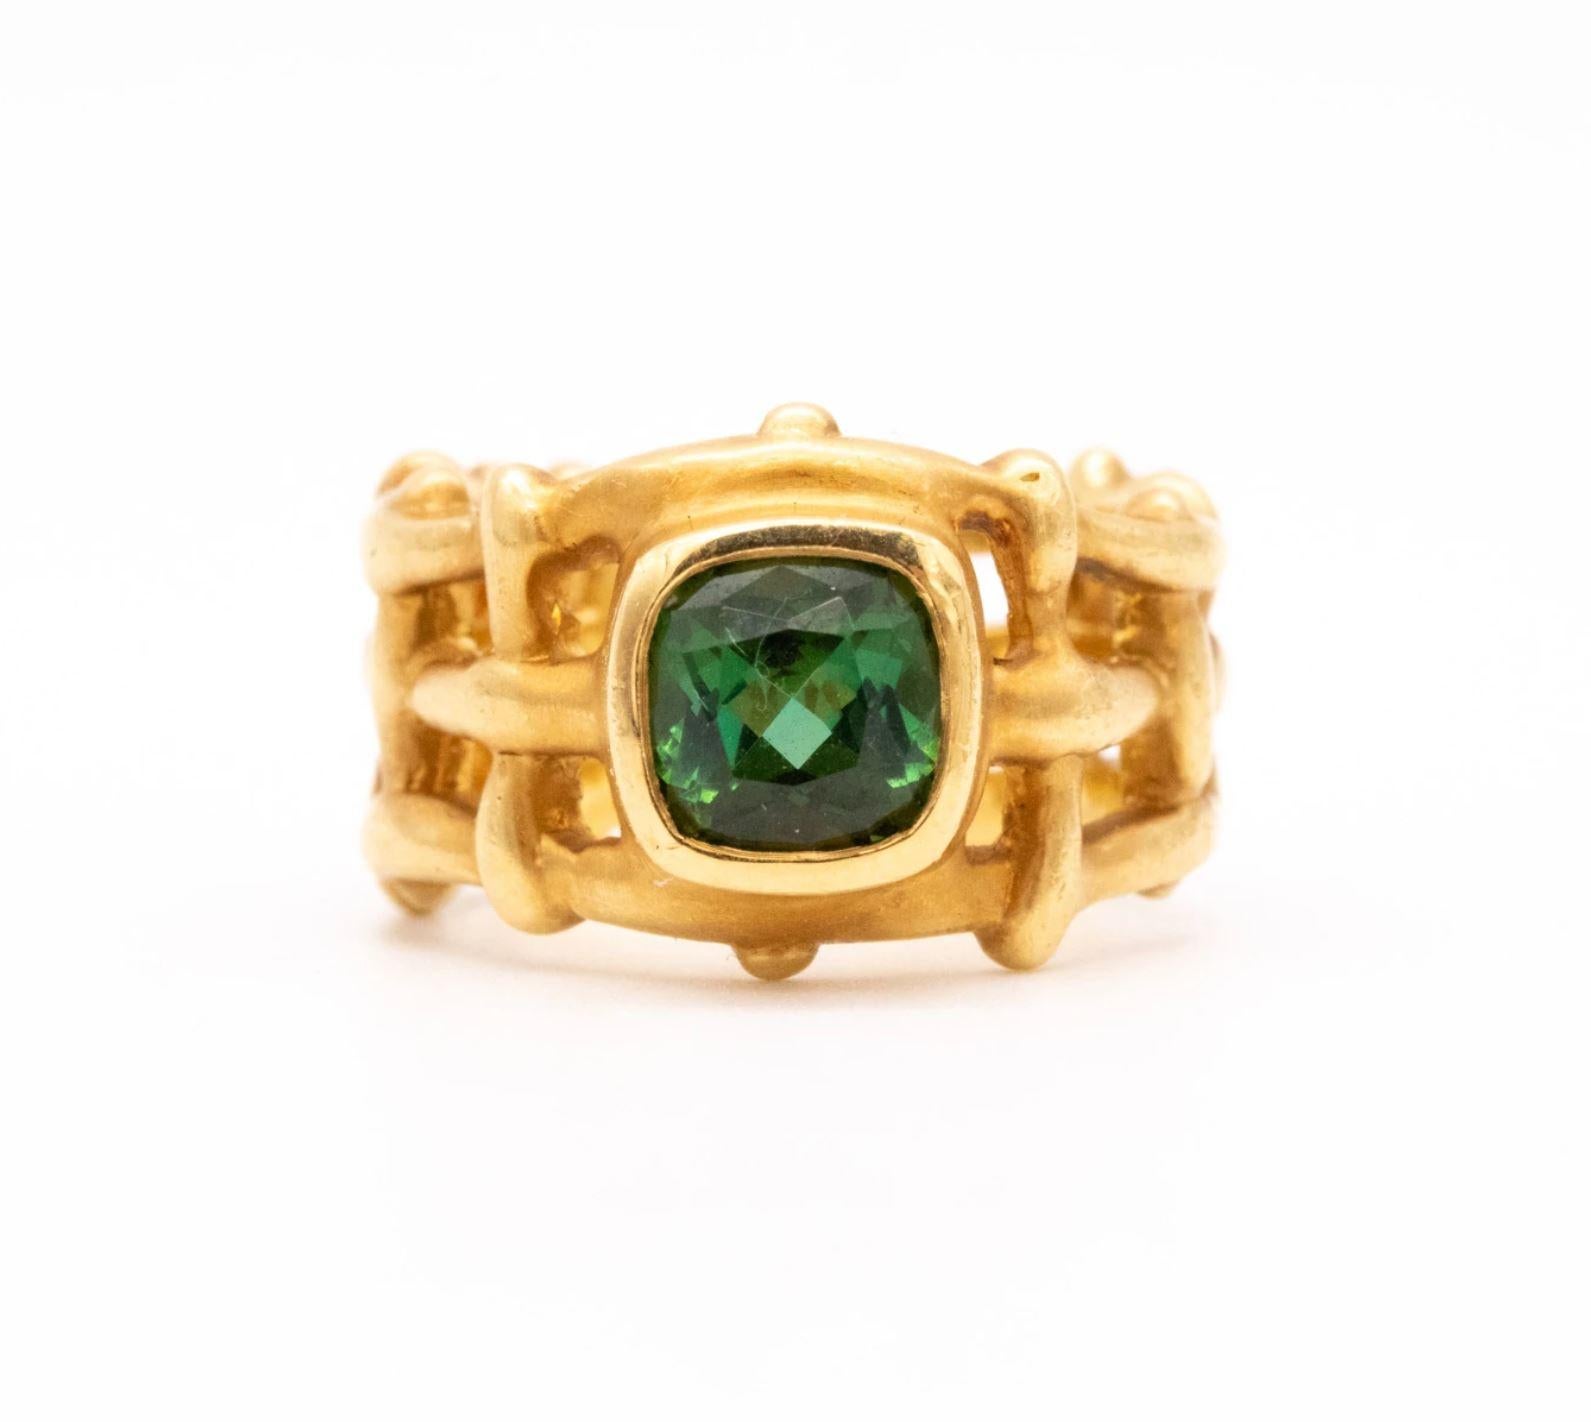 Cushion Cut Angela Cummings Studios Rare Cocktail Ring 18Kt Yellow Gold 2.13 Cts Tourmaline For Sale